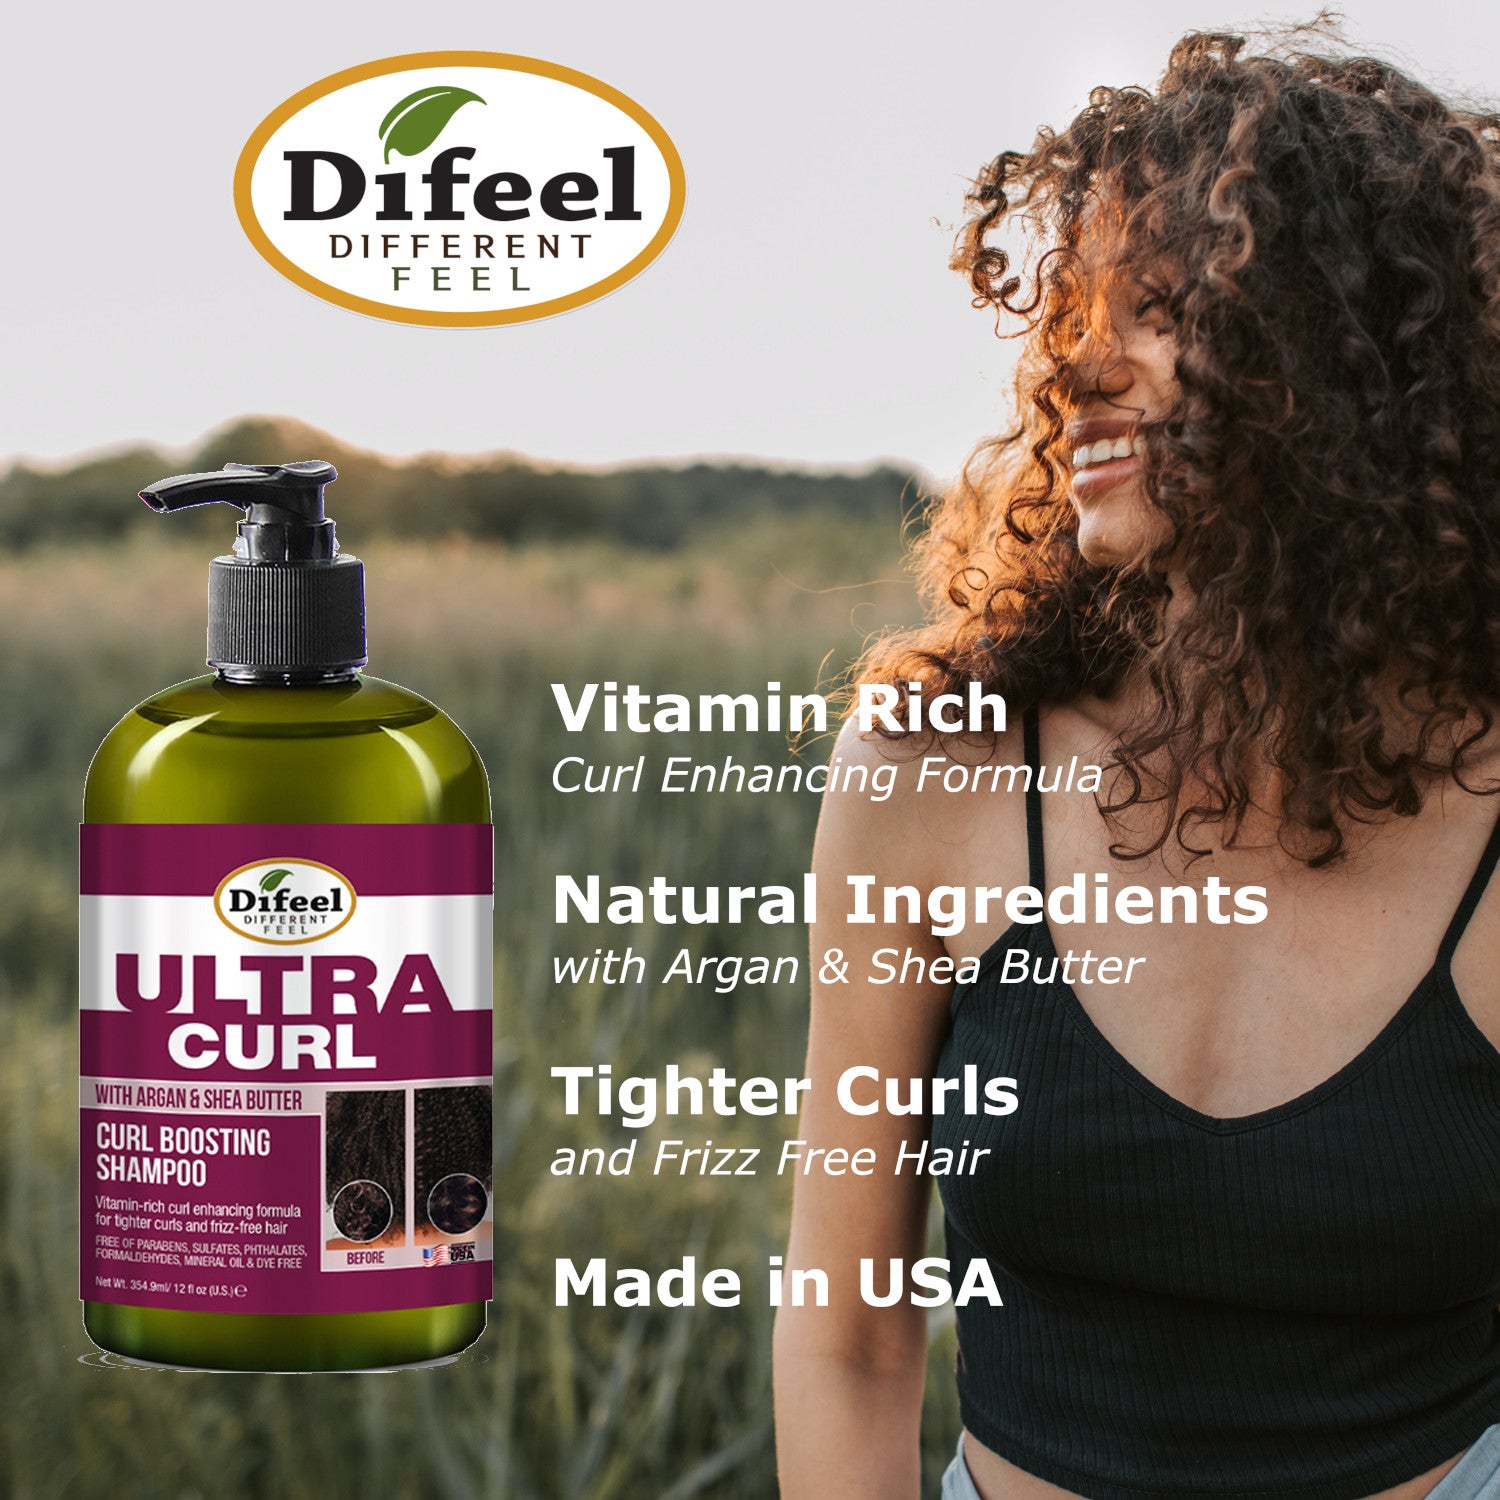 Difeel Ultra Curl with Argan & Shea Butter - Curl Boosting Conditioner 12 oz.